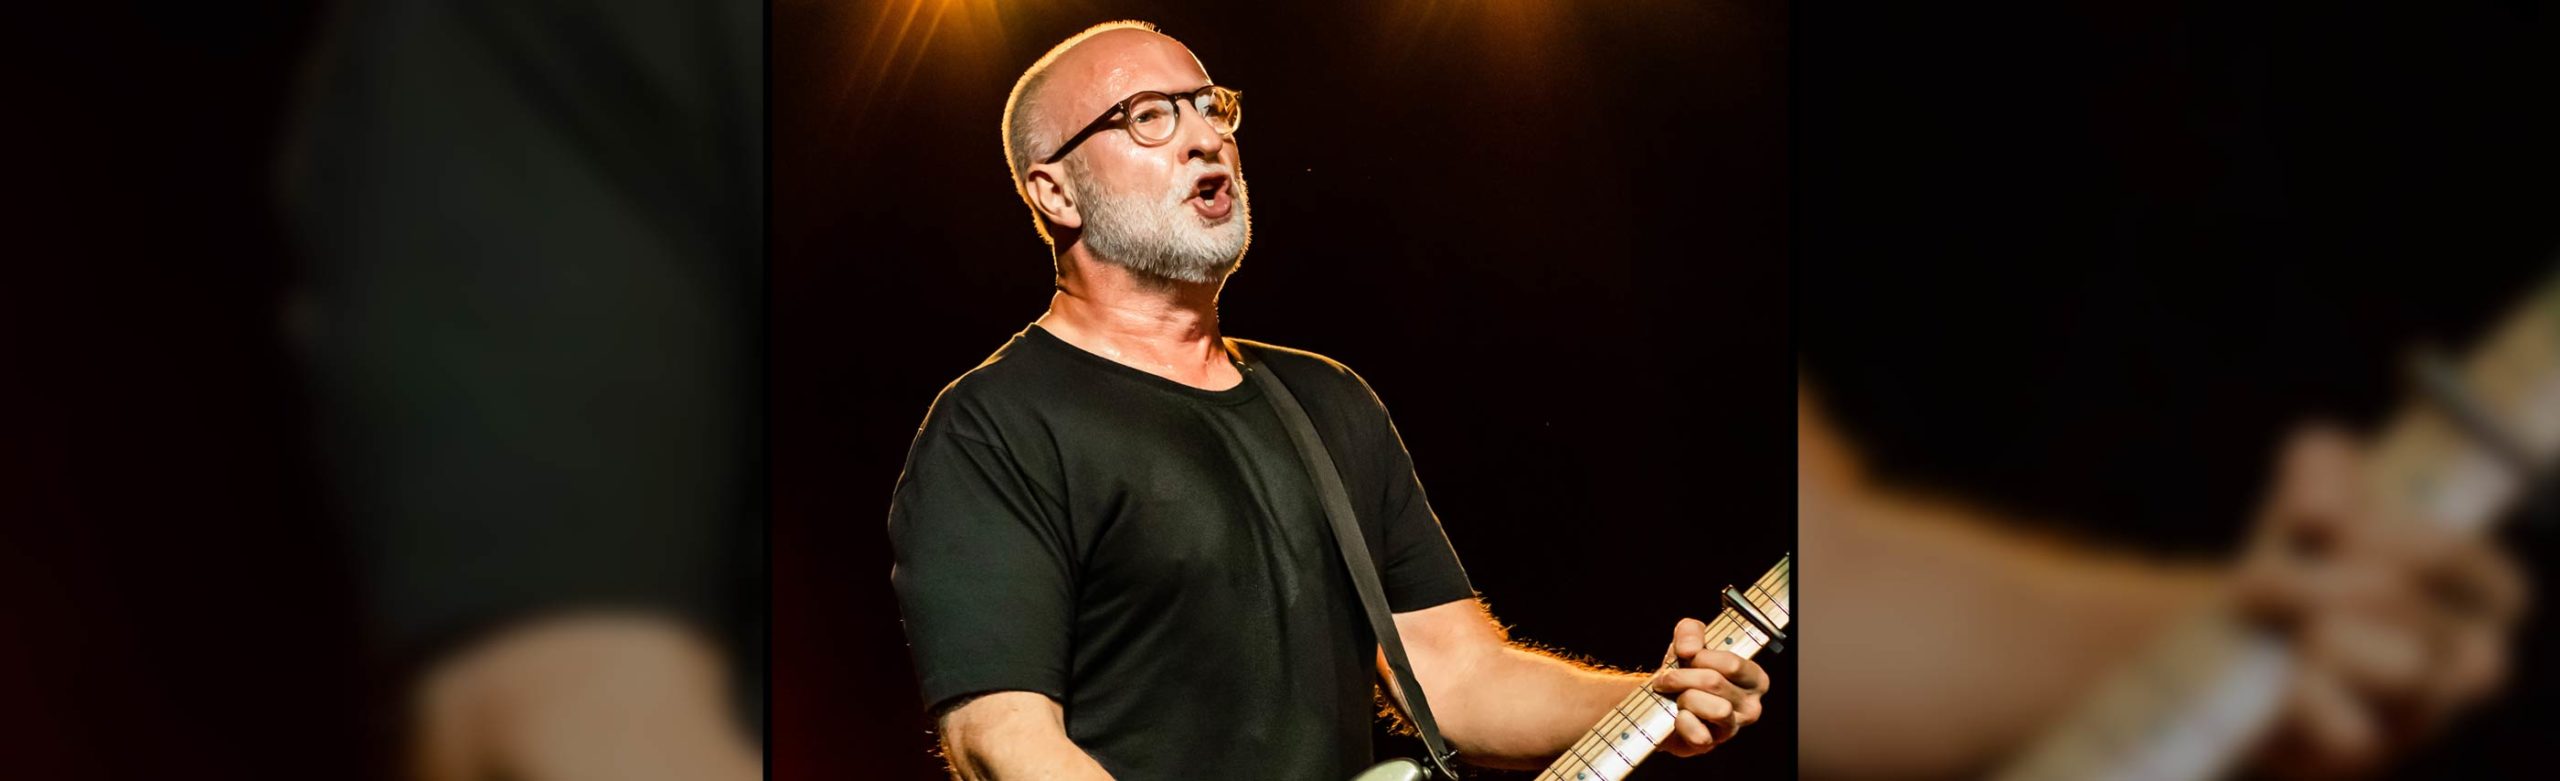 Bob Mould Tickets + Signed Album Giveaway 2022 Image